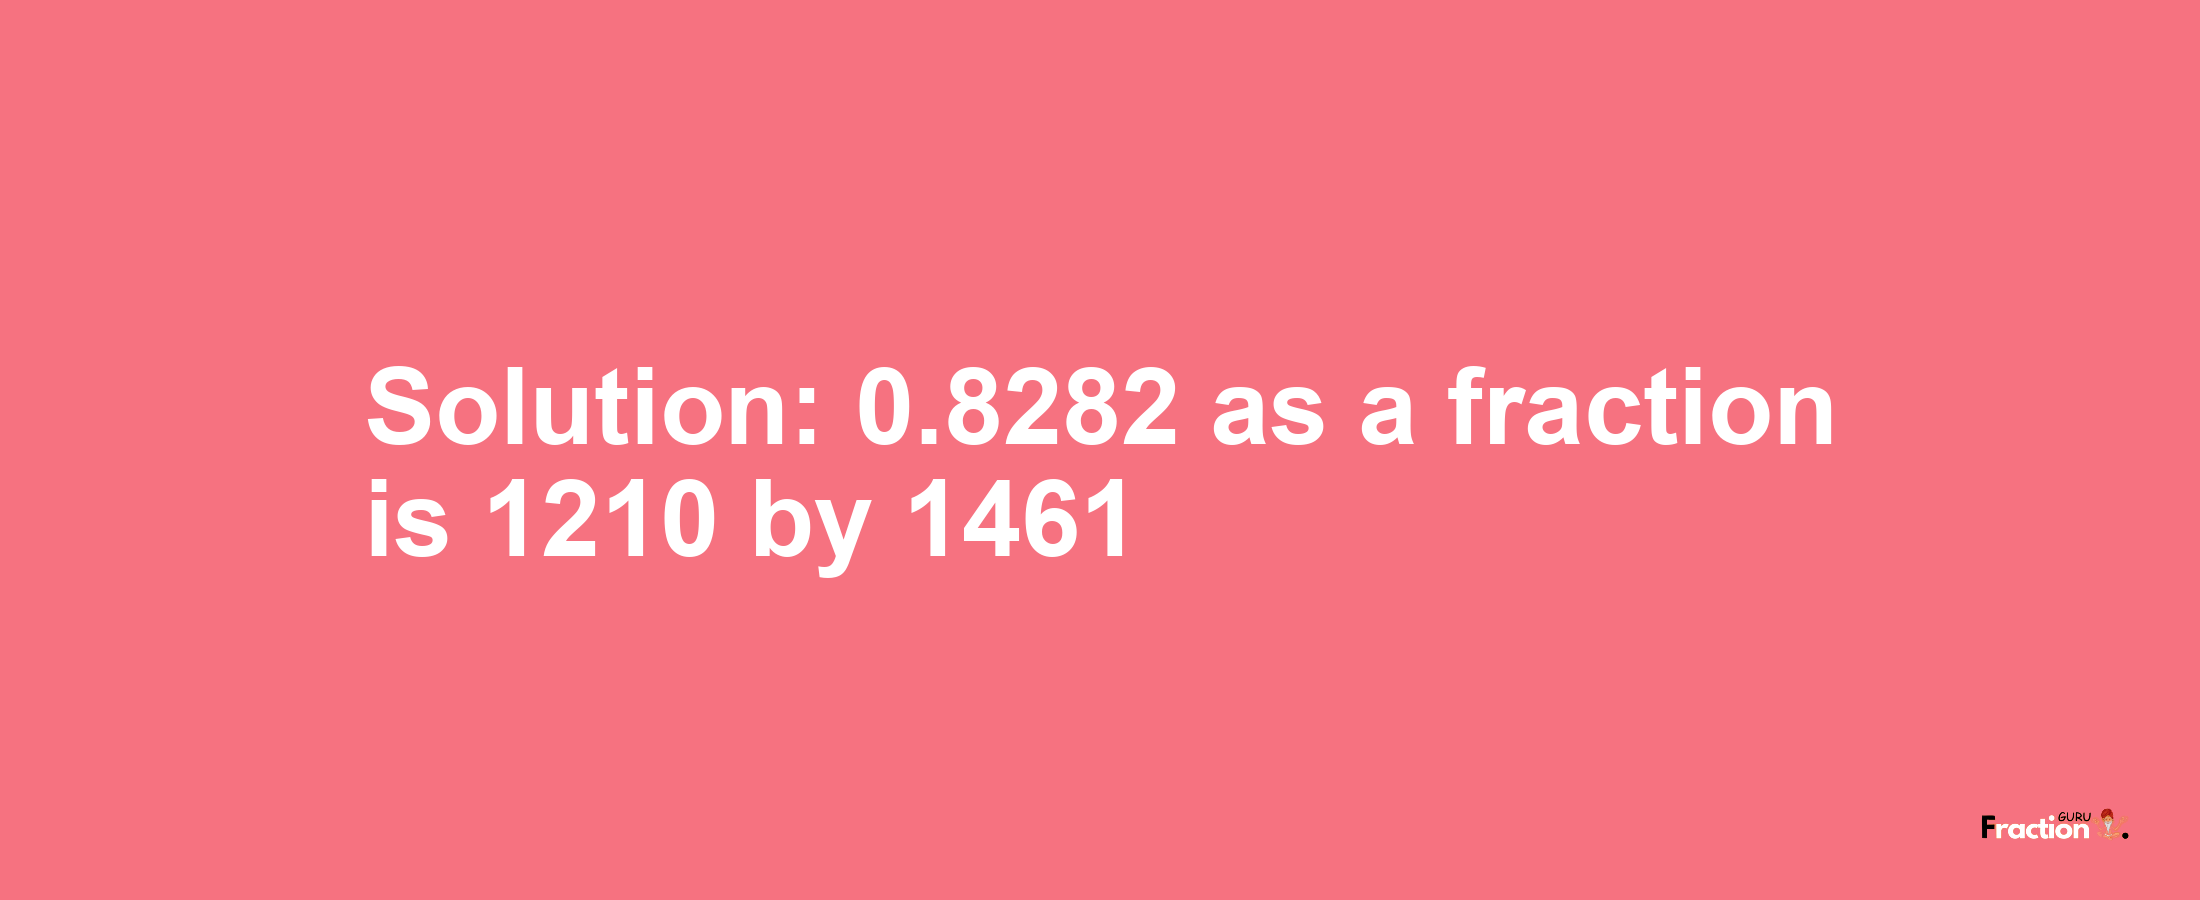 Solution:0.8282 as a fraction is 1210/1461